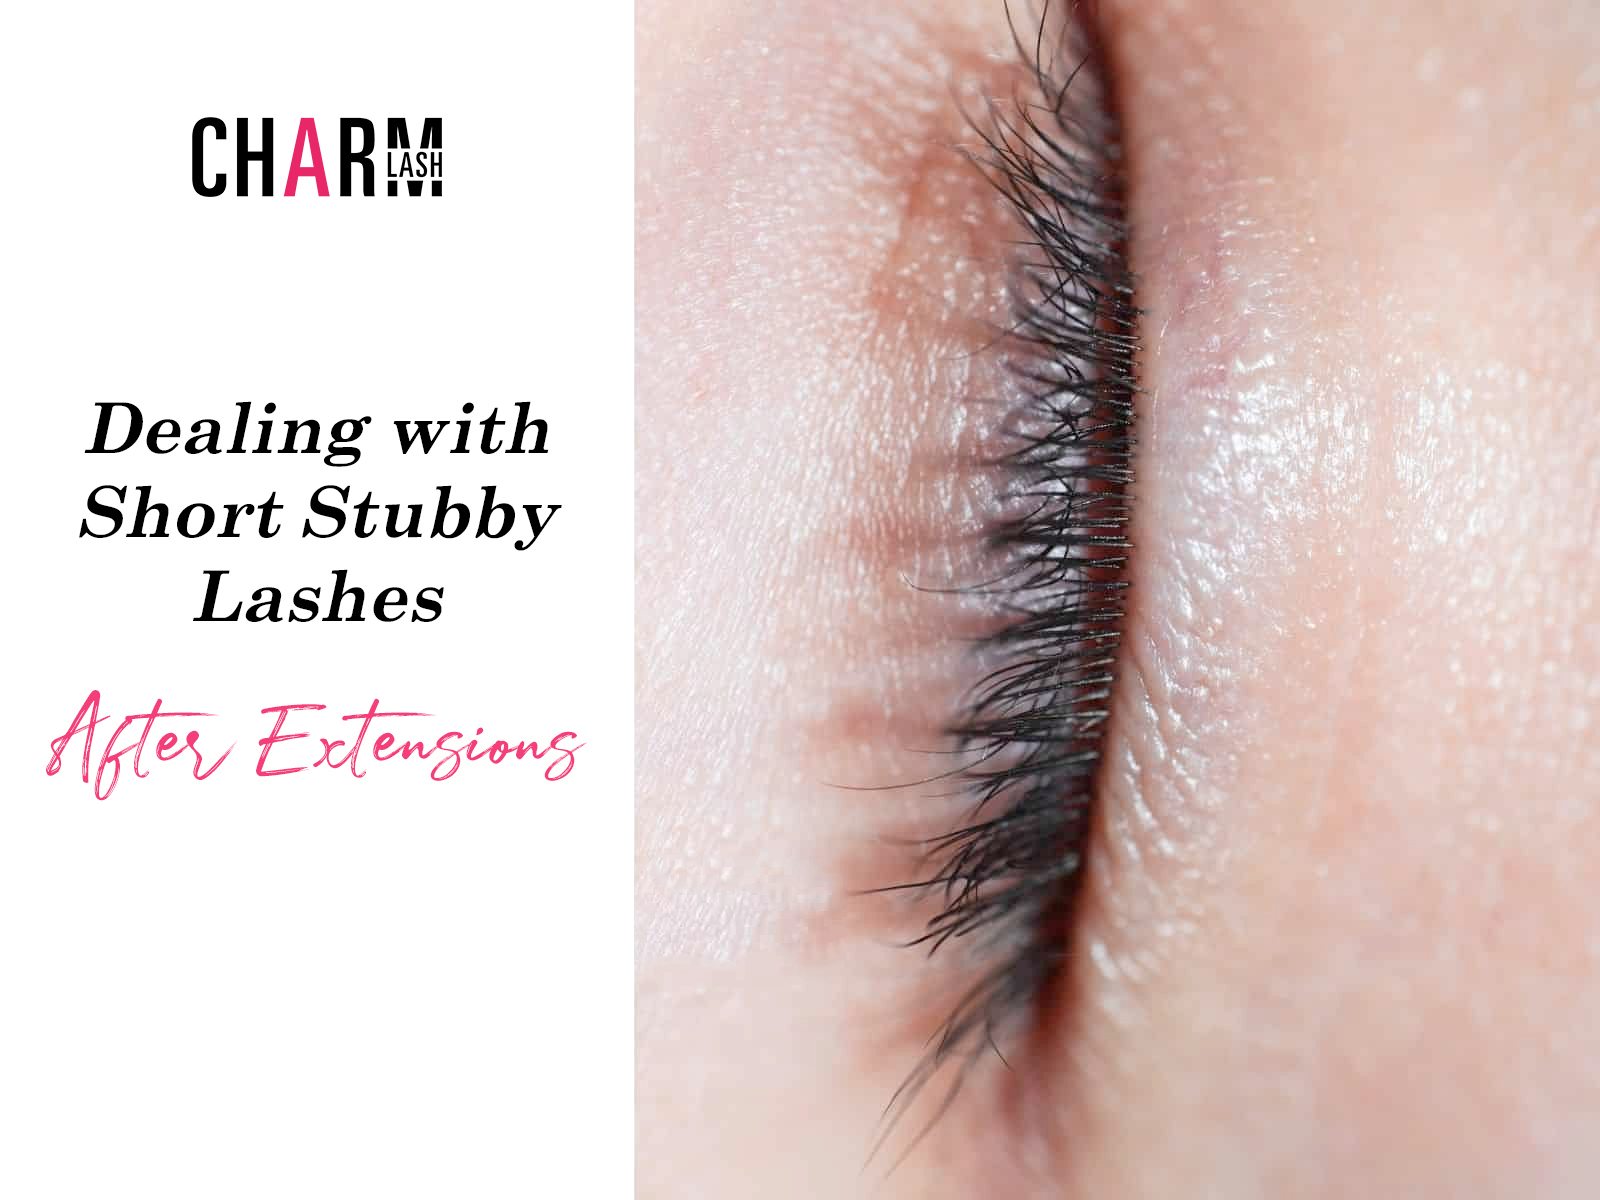 Dealing with short stubby lashes after extensions